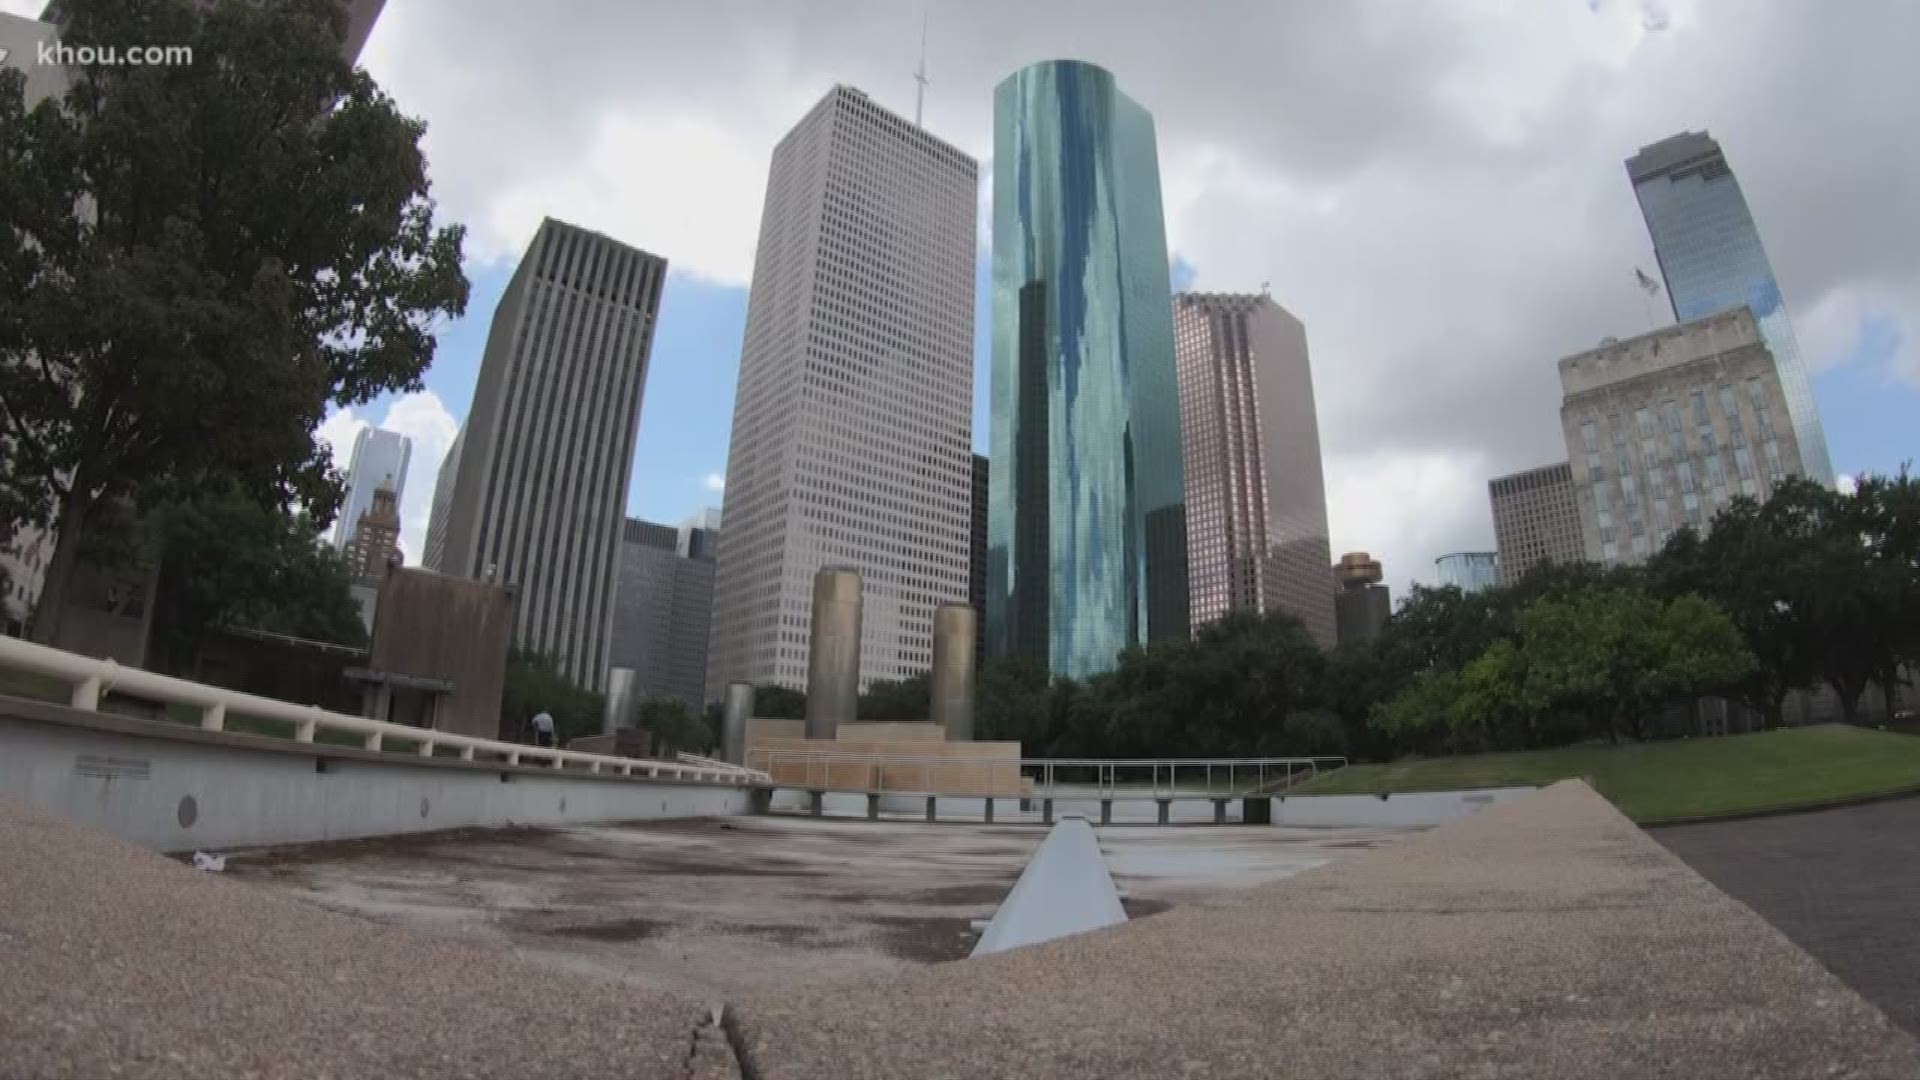 Like the Moon’s “Sea of Tranquility” for which it’s named, downtown Houston’s Tranquility Park sits mostly silent. Water no longer flows from fountains that mimic Apollo 11 rocket boosters, and vast pools around their base collect trash and dead leaves.